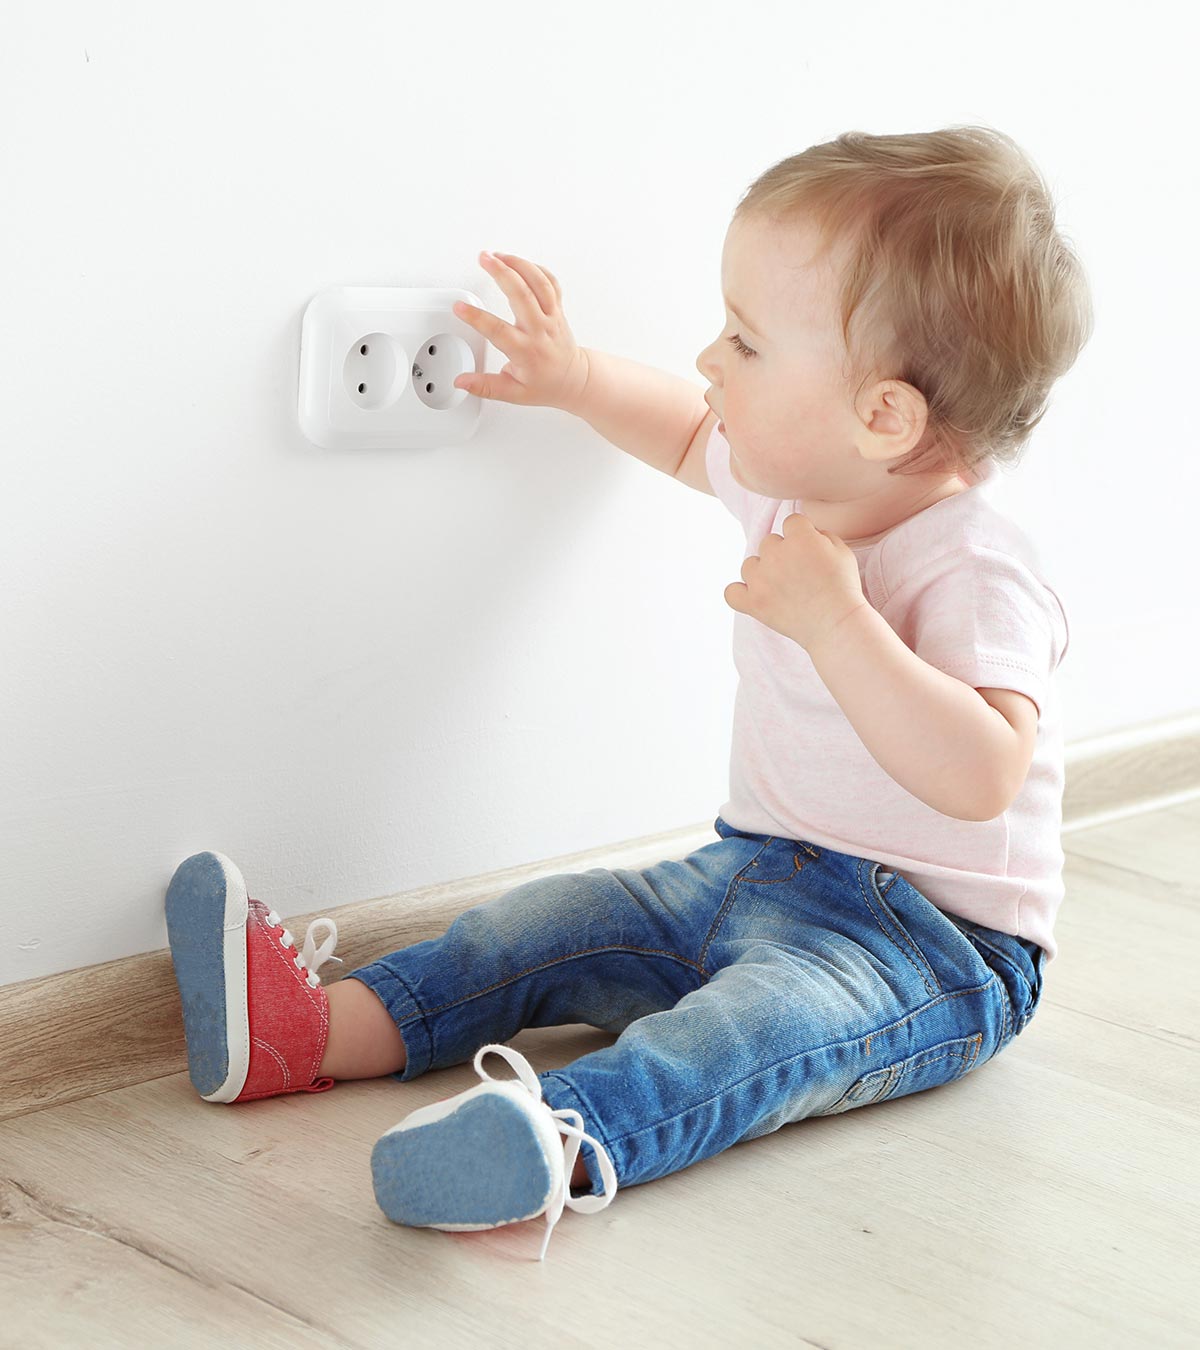 5 Pack Plug Socket Covers Baby Child Protection Home Safety 